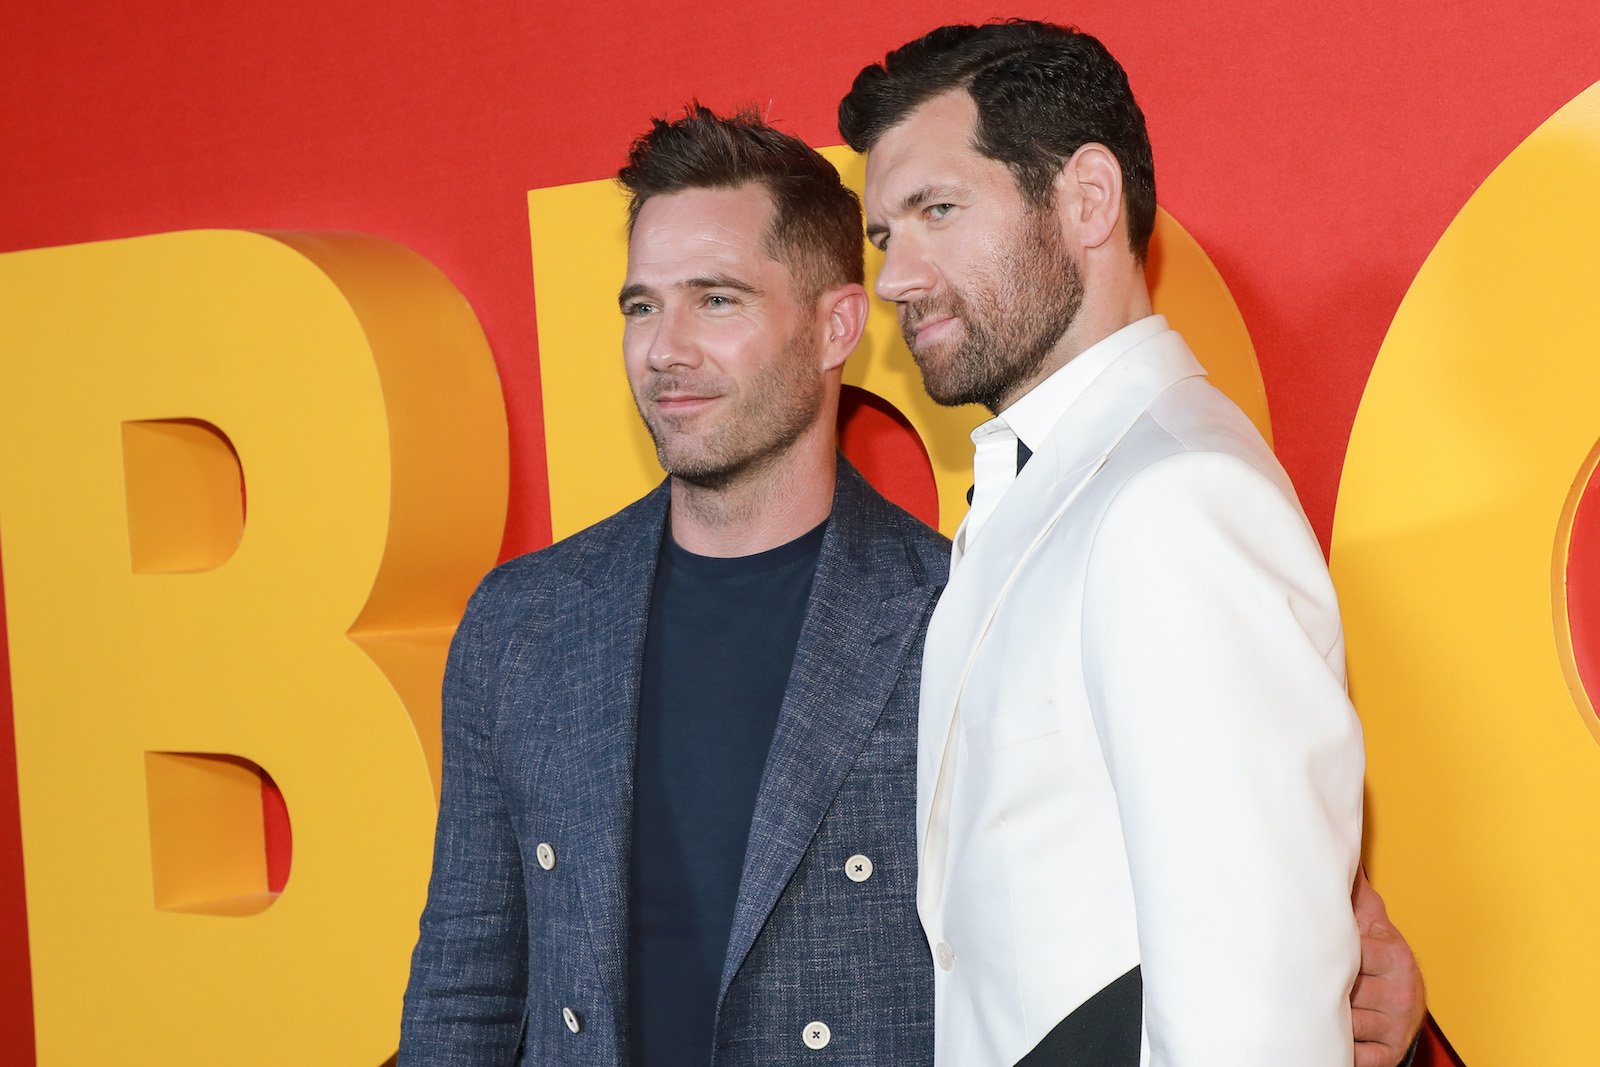 Luke Macfarlane and Billy Eichner pose for a photo at the Bros premiere